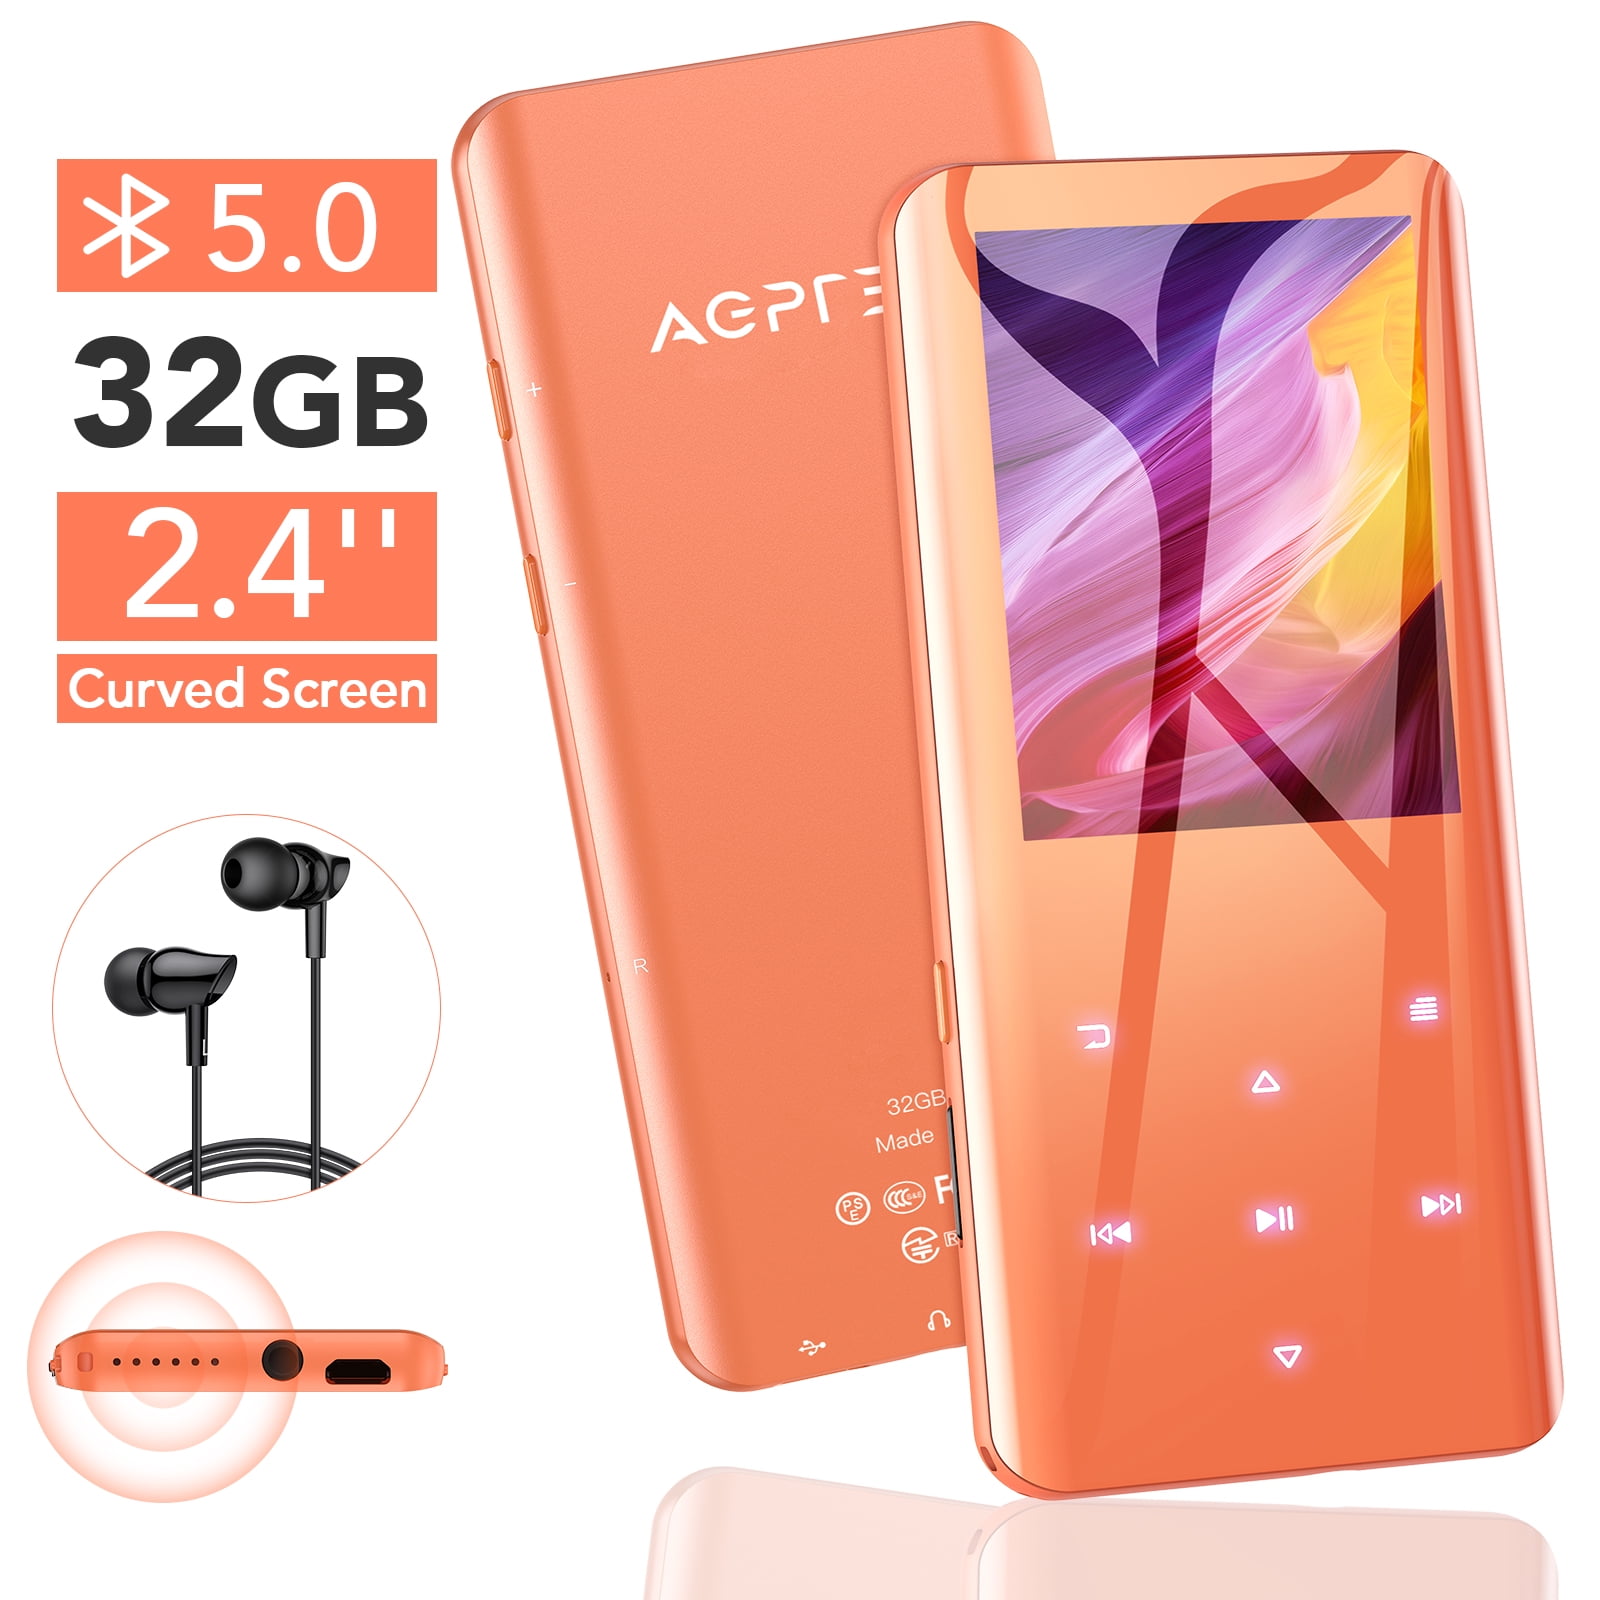 AGPTEK MP3 Player with 2.4″ Curved Screen, Music Player with Speaker HiFi  Lossless Sound, FM Radio, Voice Recorder, Bluetooth 5.0 32GB, A19, Orange 